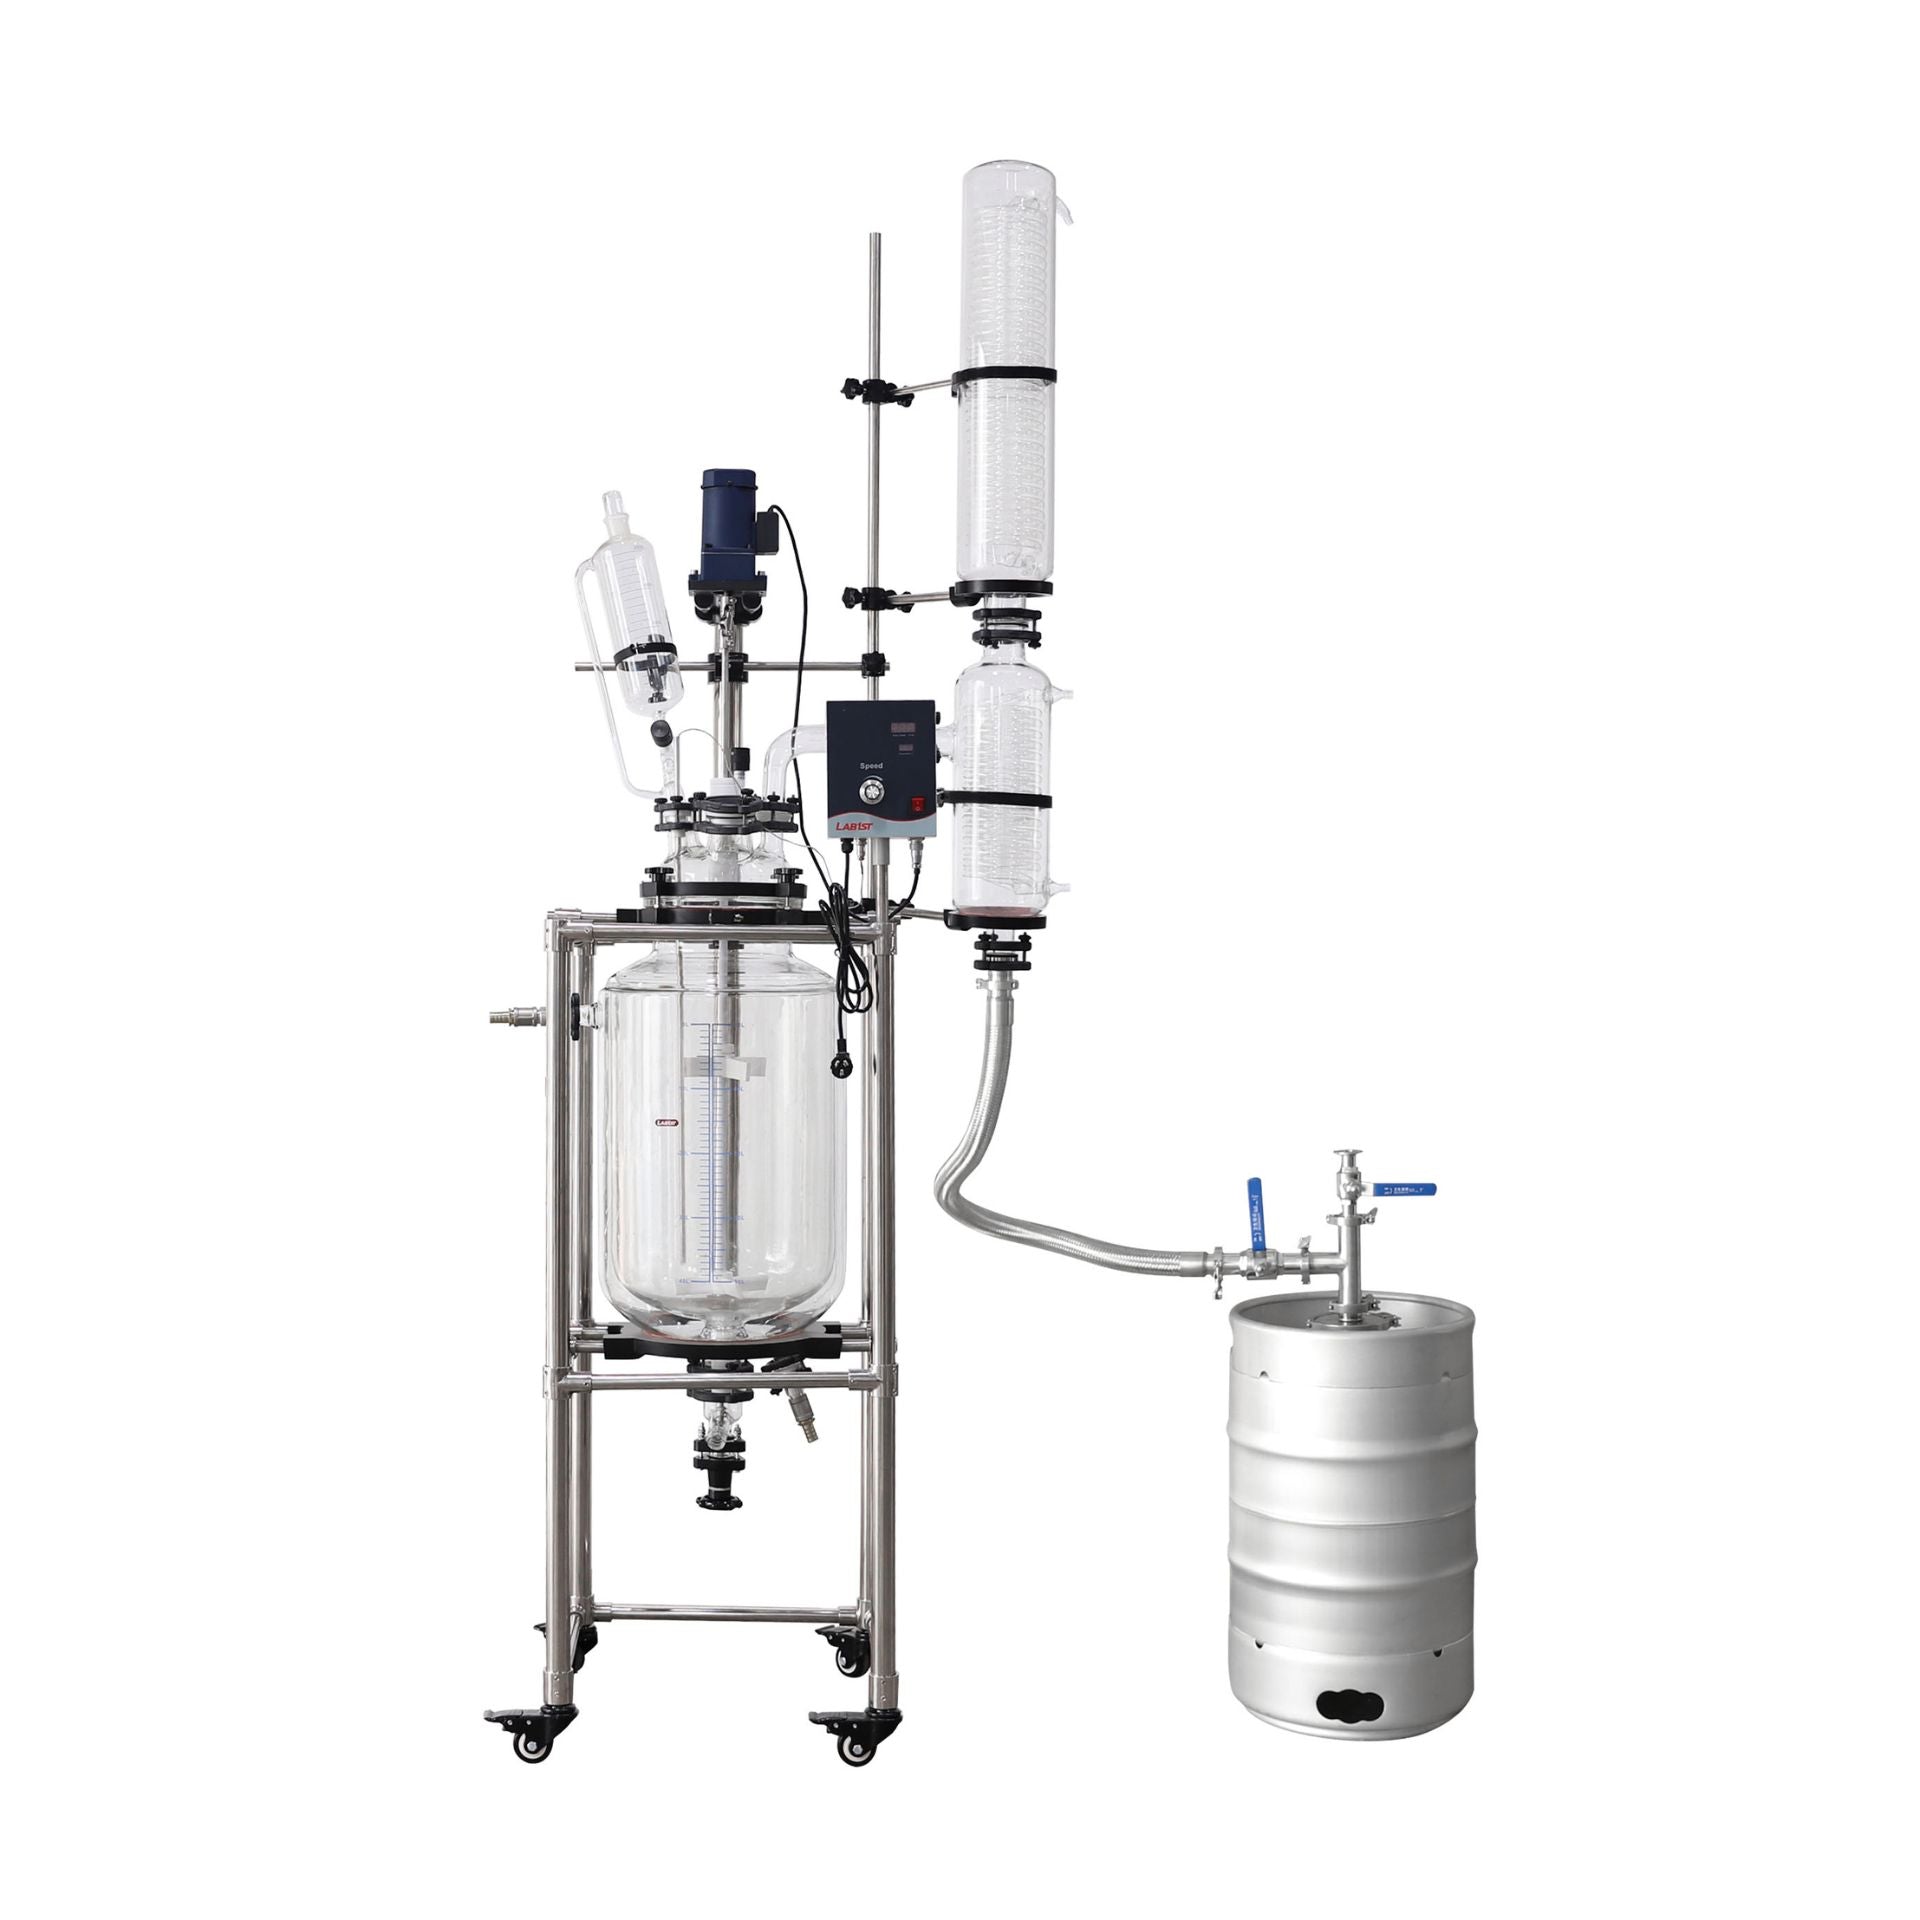 100L Jacketed Glass Evaporation Reactor Vessel Chemistry with Digital Display